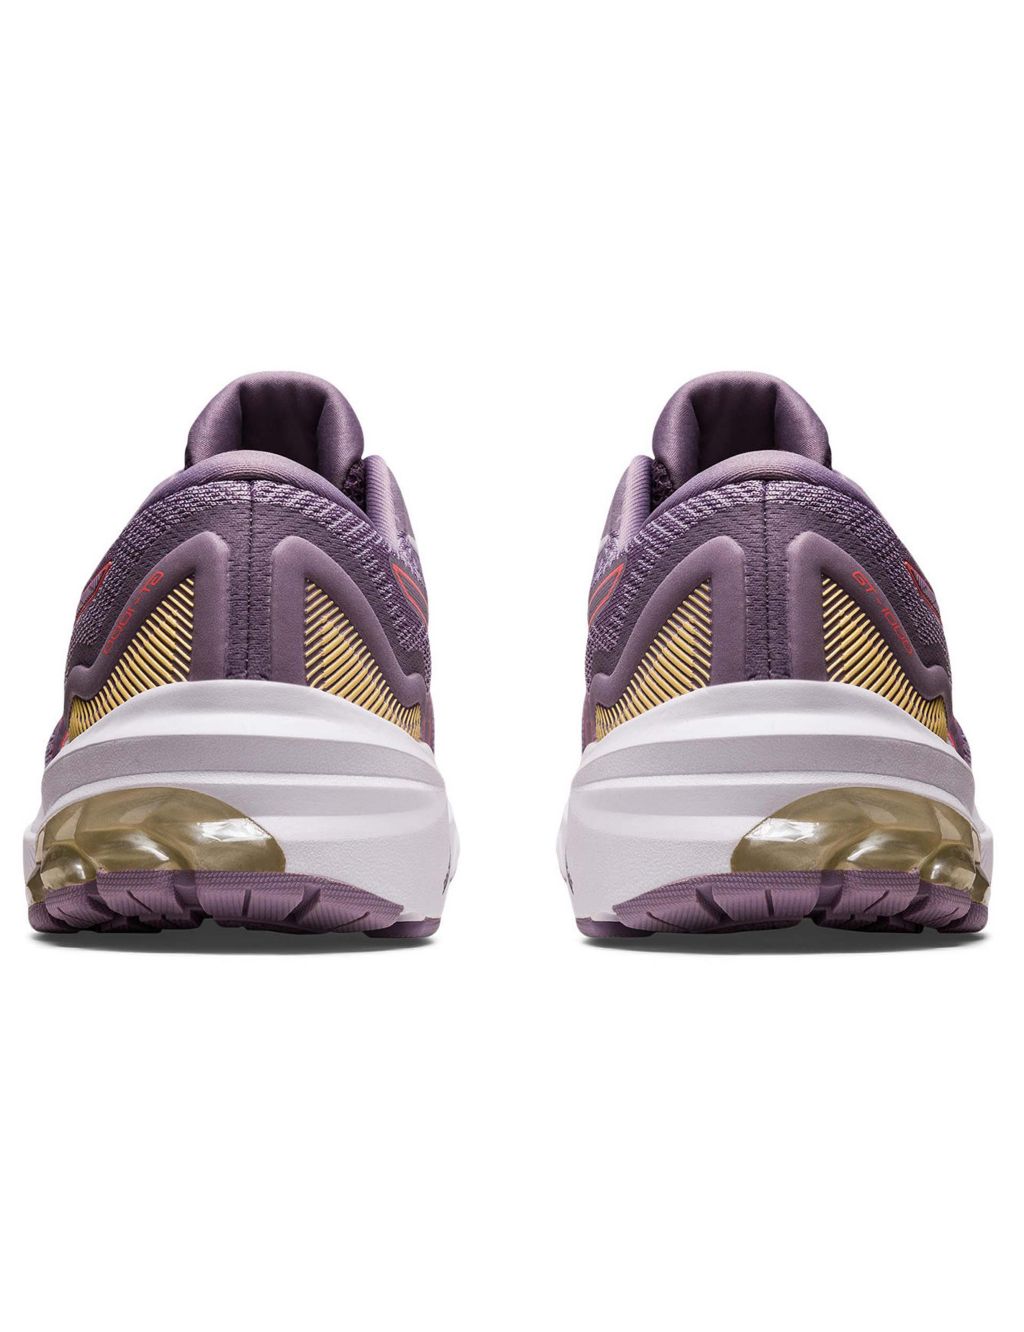 GT-1000™ Trainers image 4